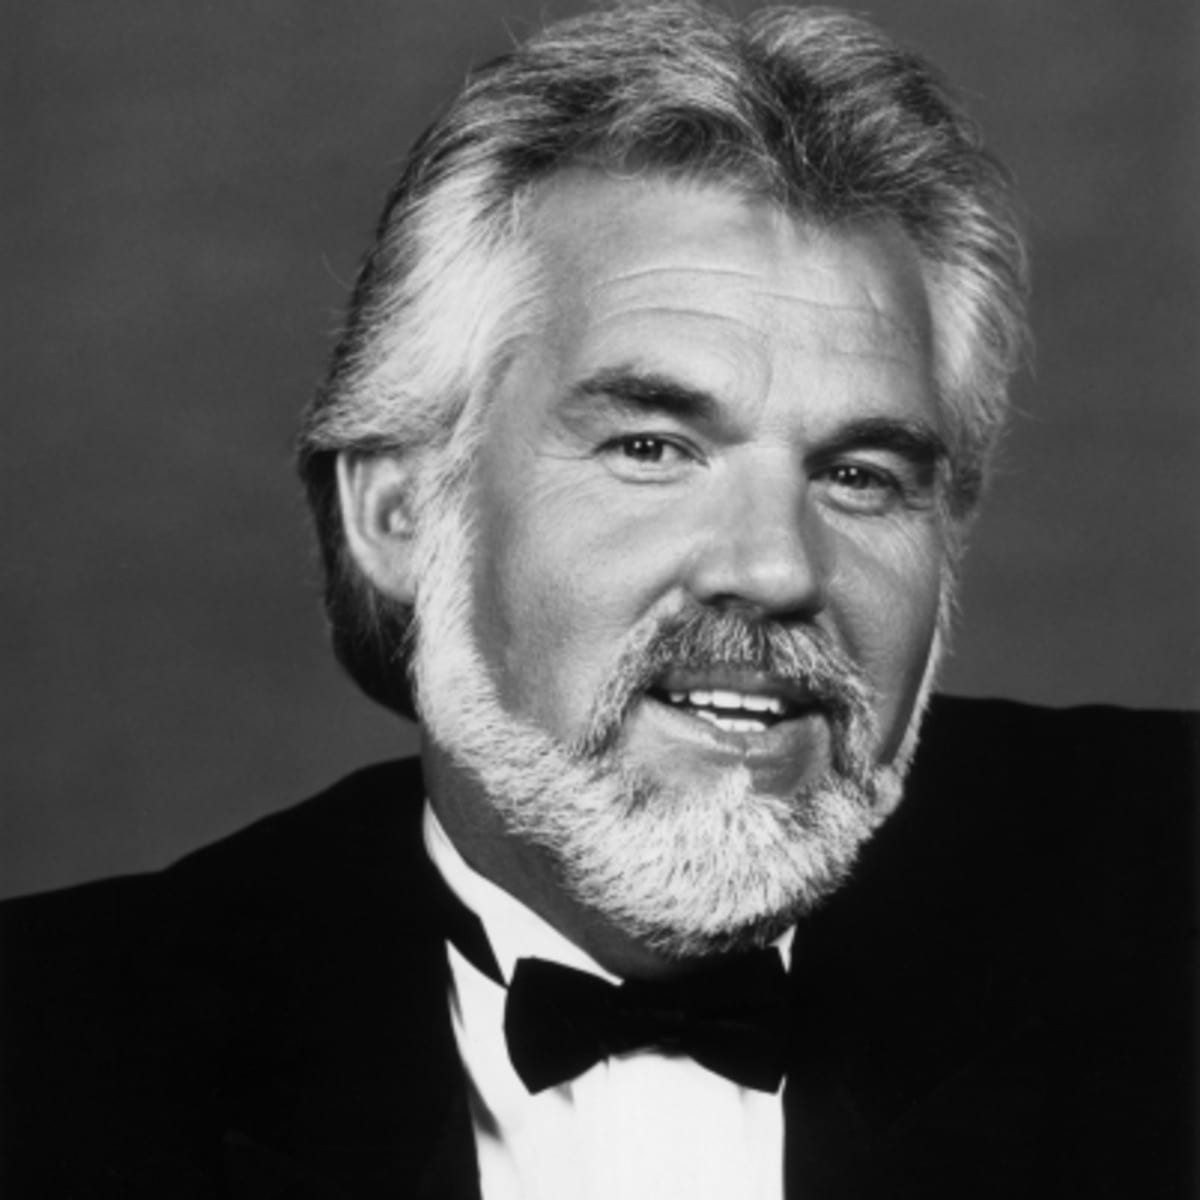 kenny rogers birthday 81 islands in the stream the gambler